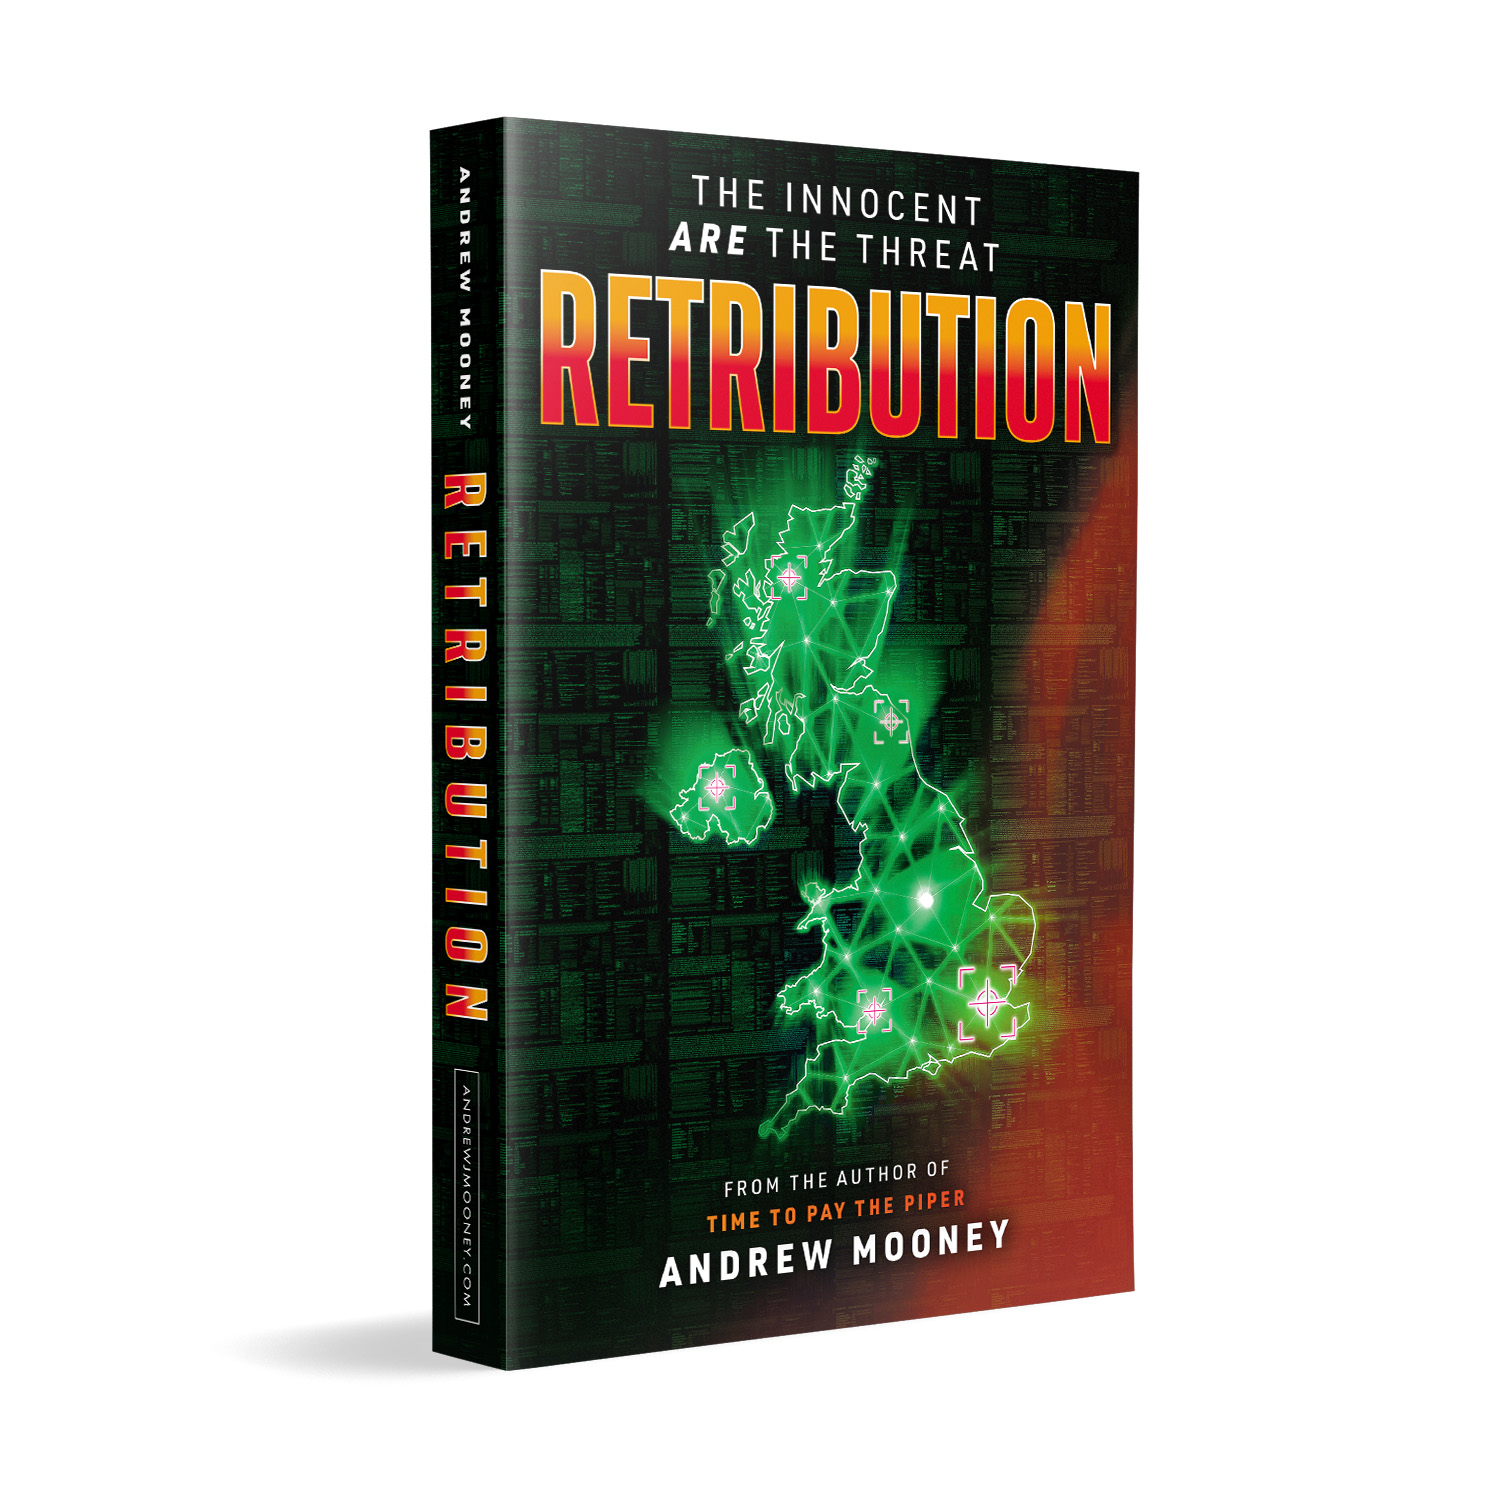 'Retribution' is a dramatic techno-terrorism thriller. The author is Andrew Mooney. The book cover and interior formatting are designed by Mark Thomas of coverness.com. To find out more about my book design services, please visit www.coverness.com